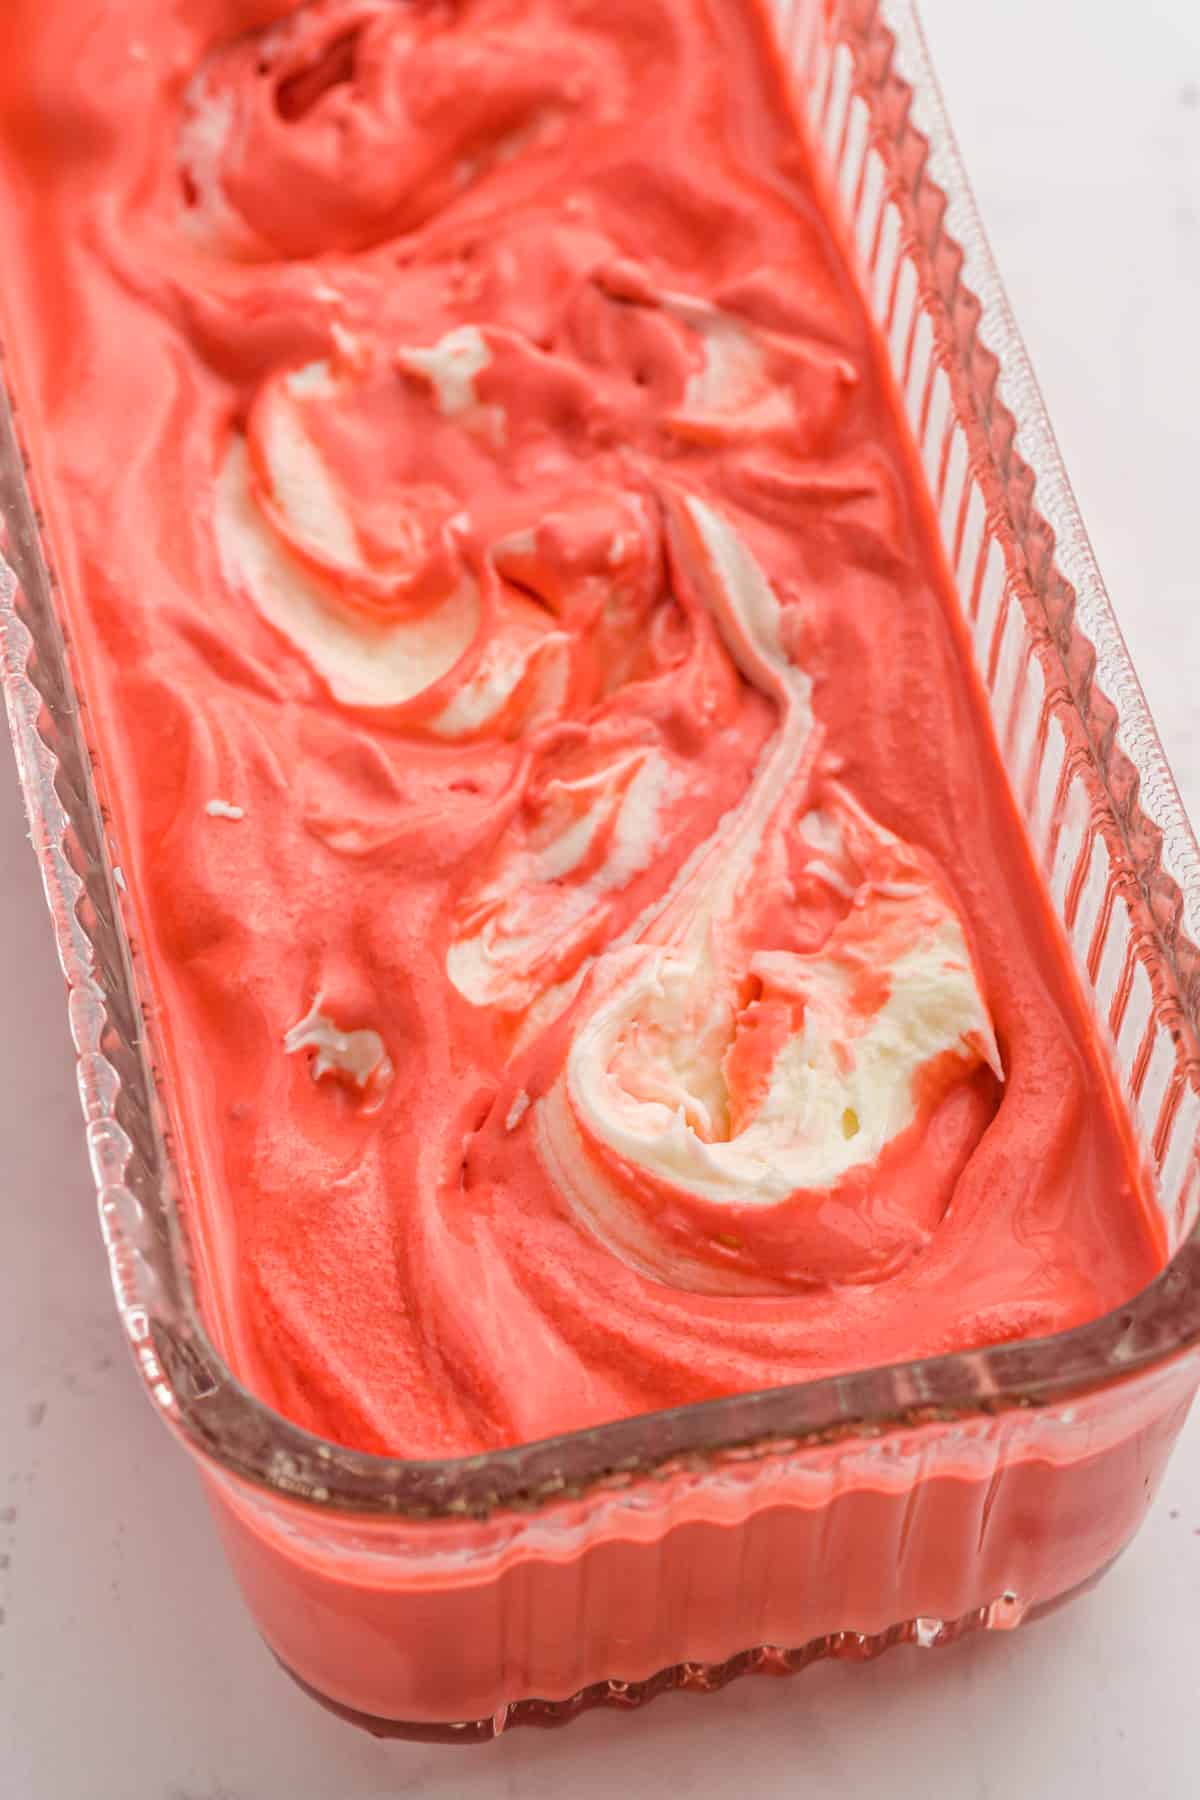 A red colored ice cream with a white swirl inside of an ice cream container after freezing